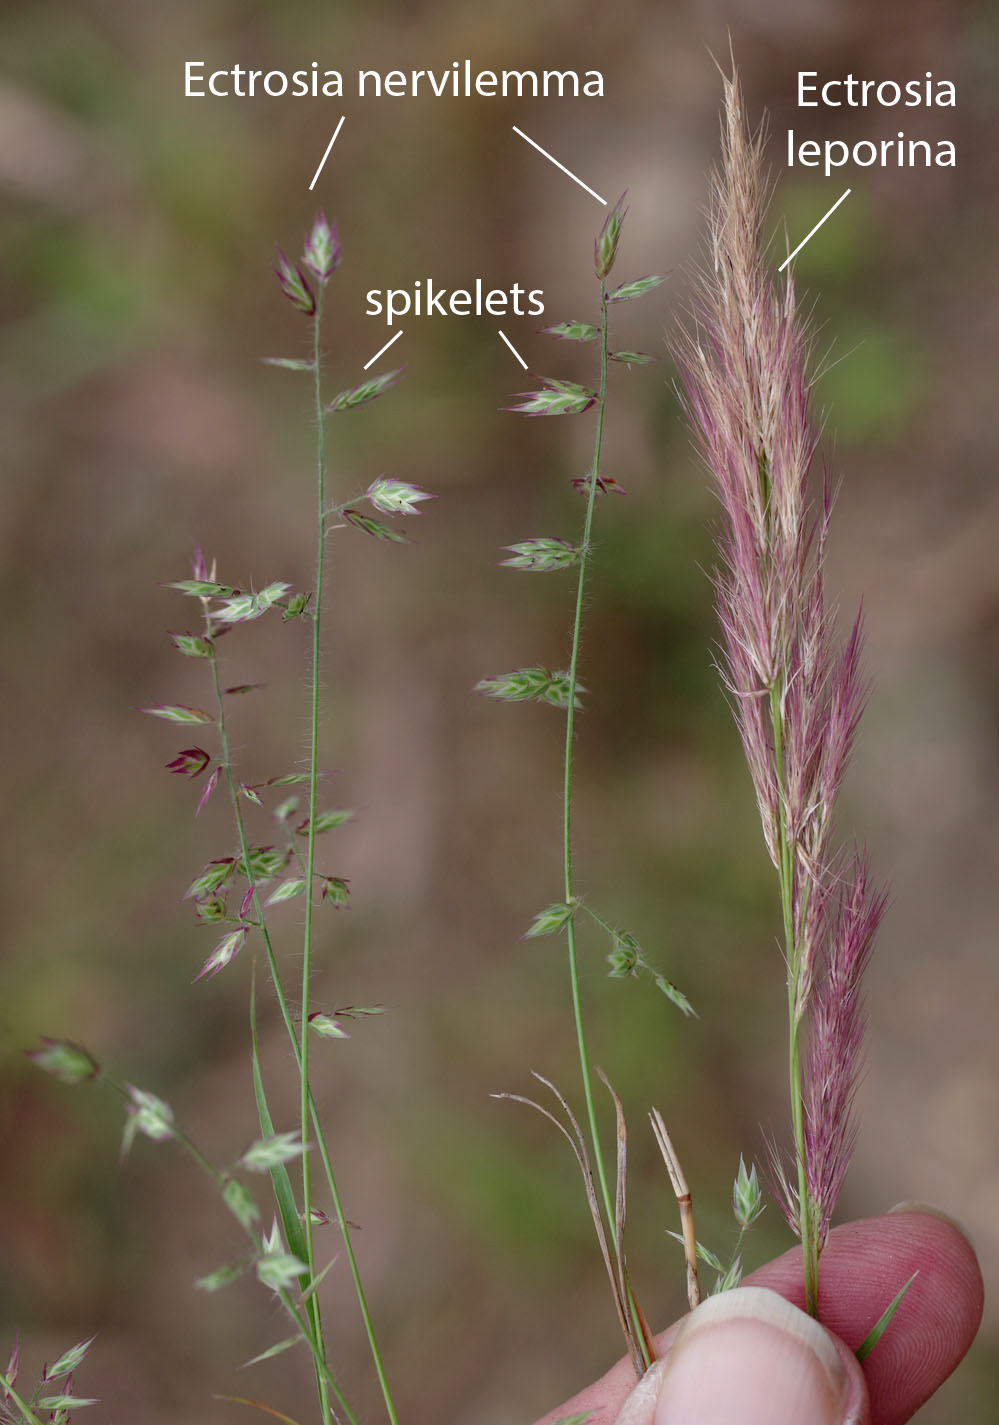 Fig. 2. Image of infloresences of Ectrosia nervilemma and Ectrosia leporina. Showing sparsely arranged spikelets in Ectrosia nervilemma and congested spikelets in E. leporina. (CC By: RJ Cumming d77330a)